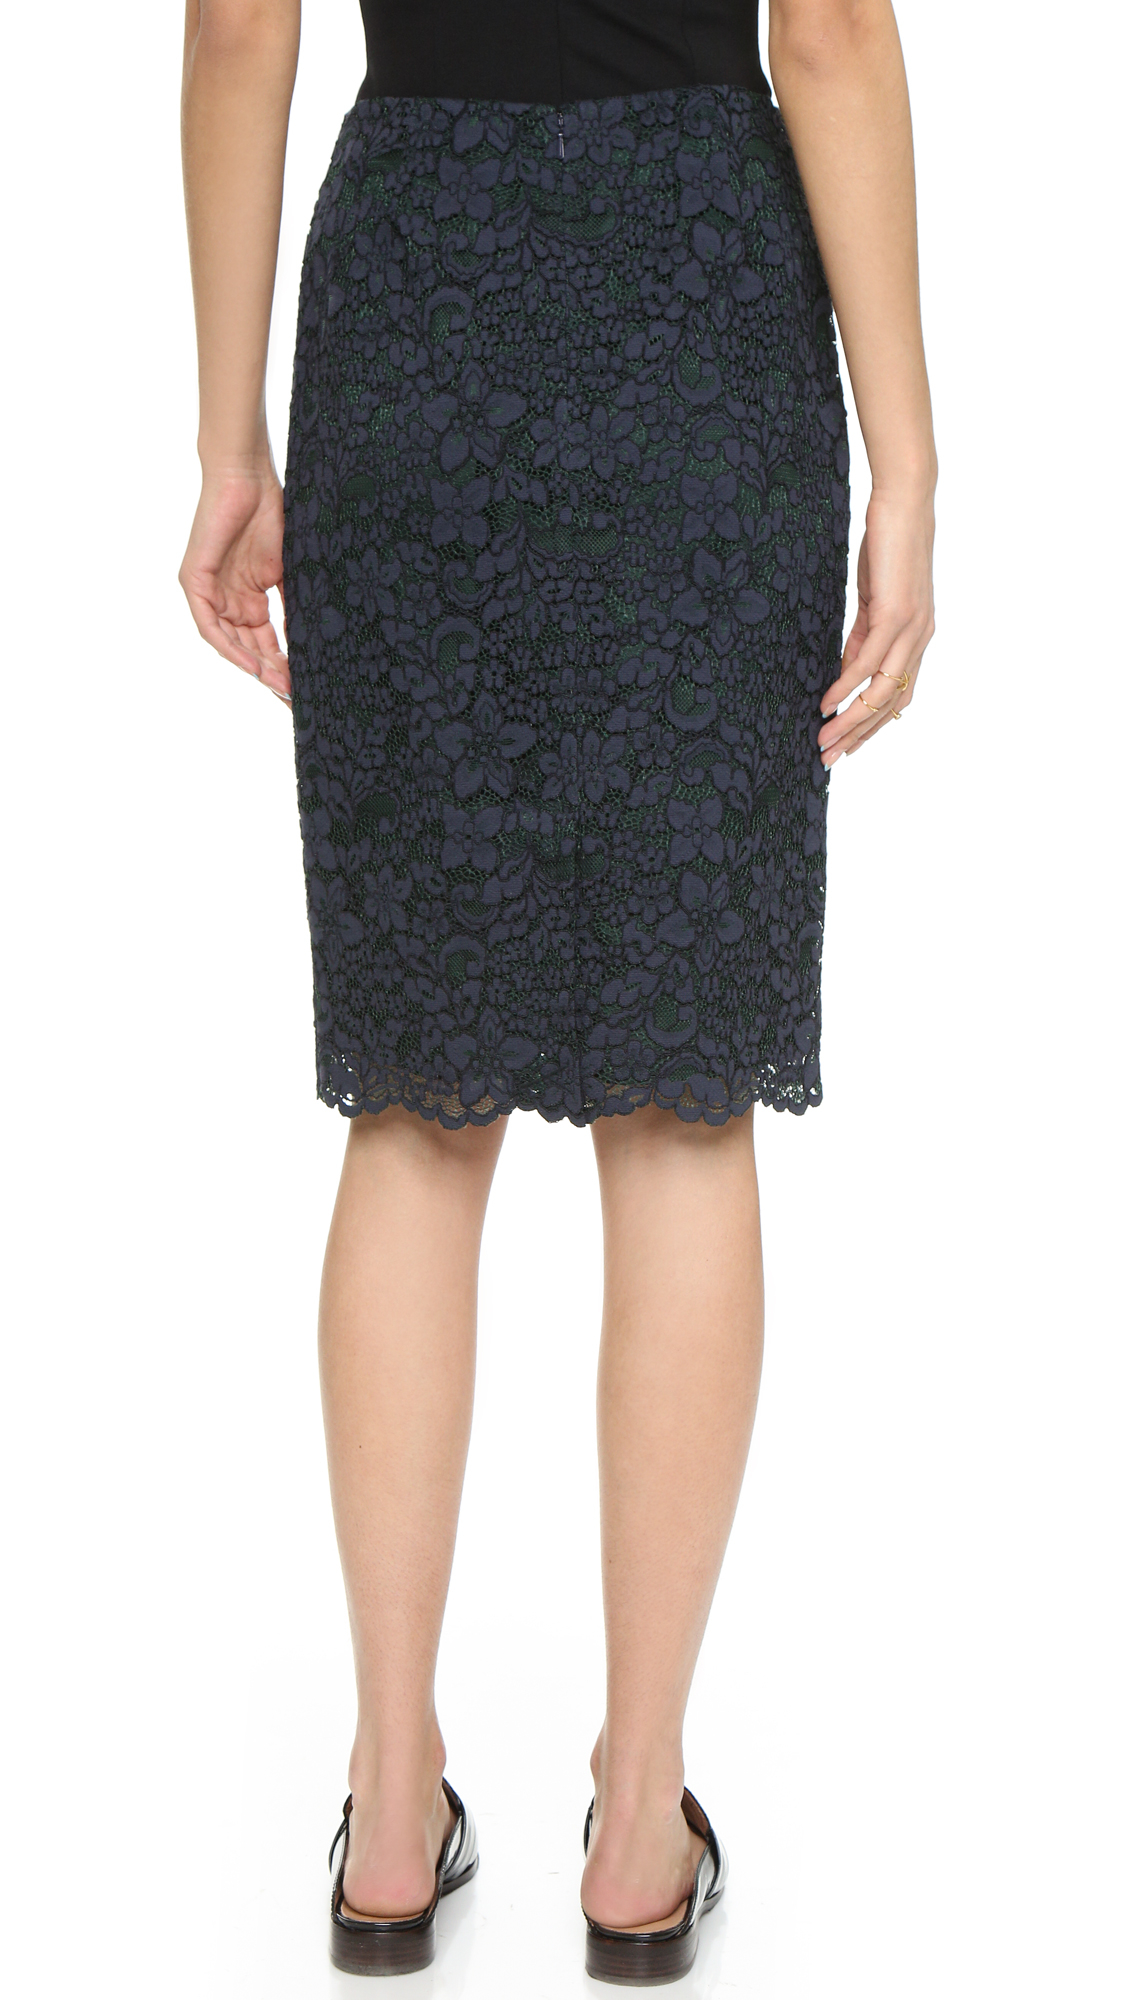 Lyst - Tory Burch Lace Pencil Skirt - Med Navy in Blue